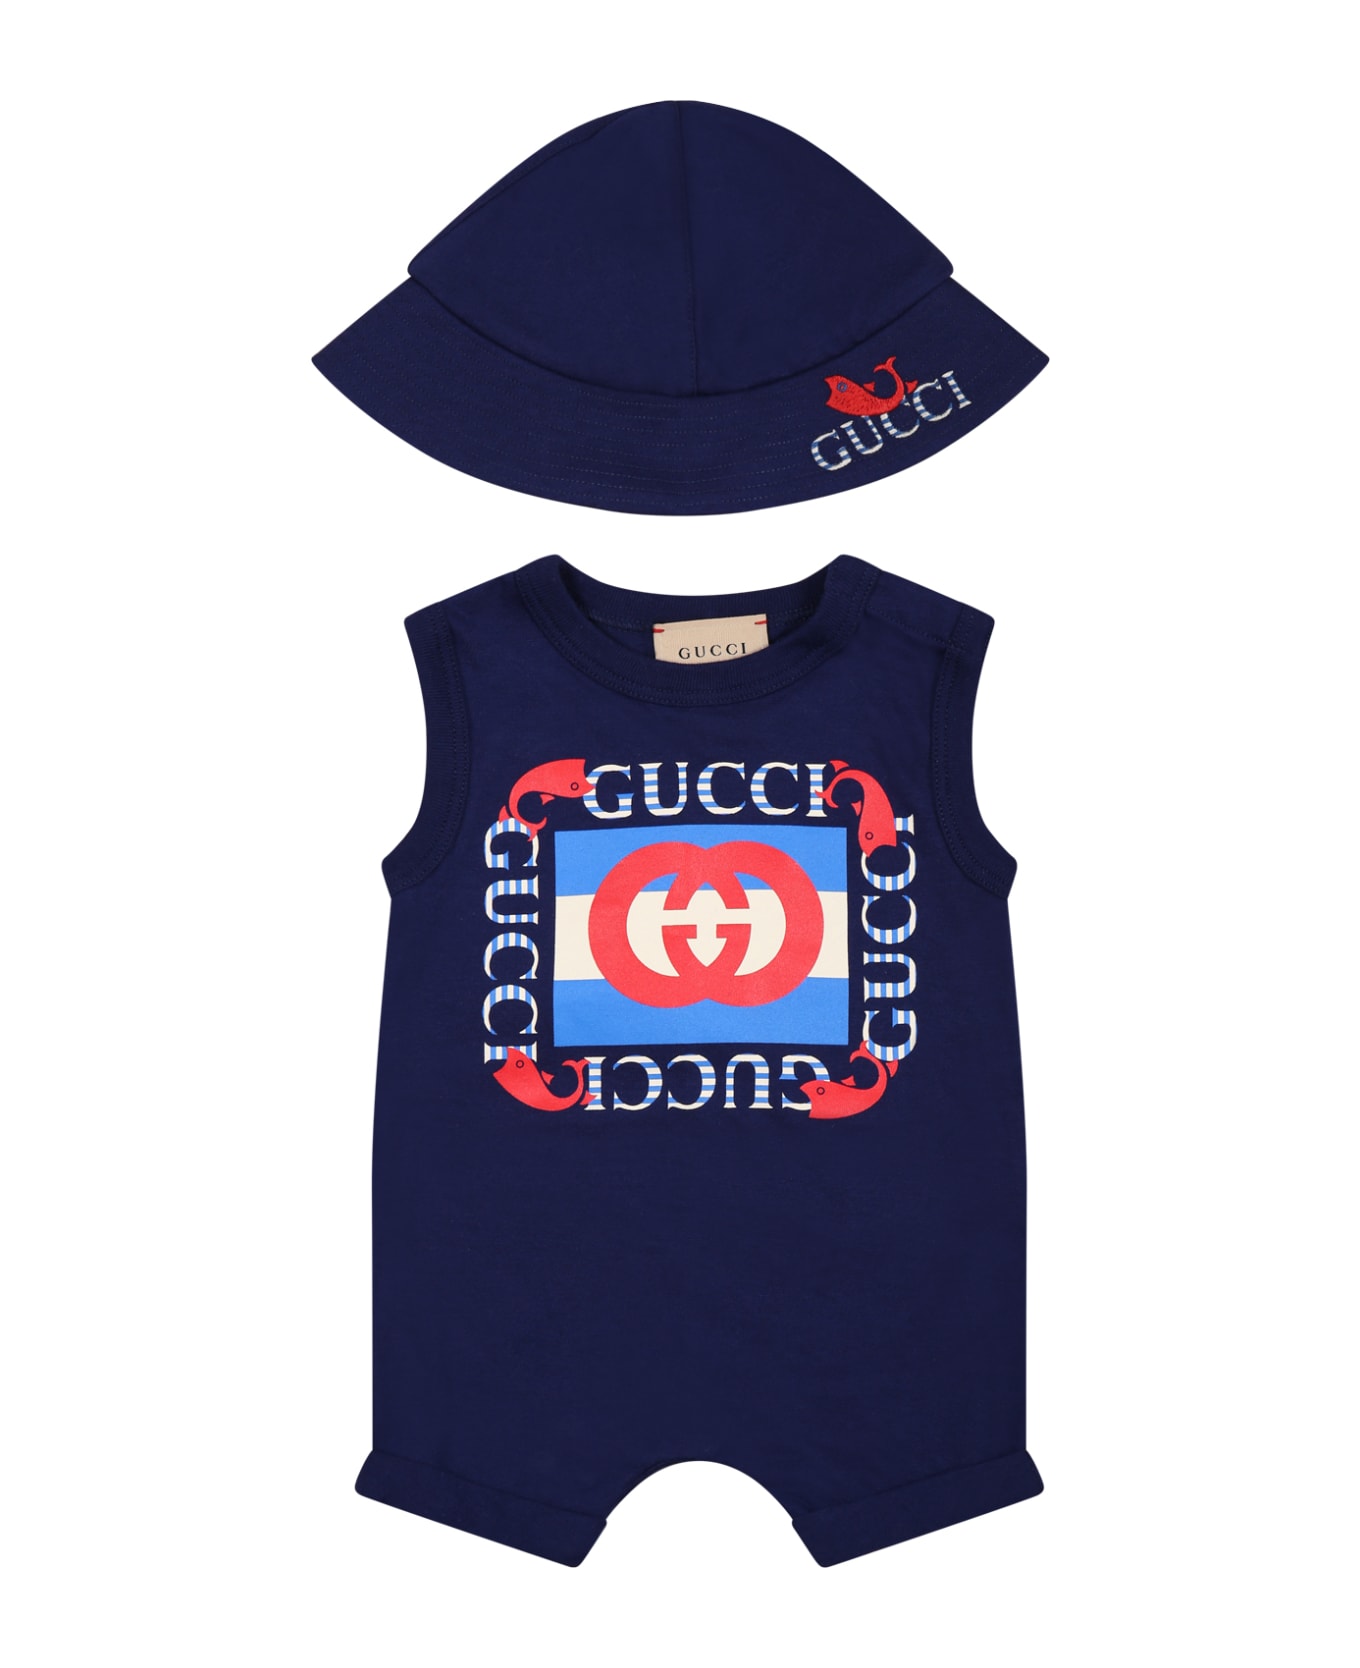 Gucci Blue Set For Babies With Vintage Gucci Logo - Blue